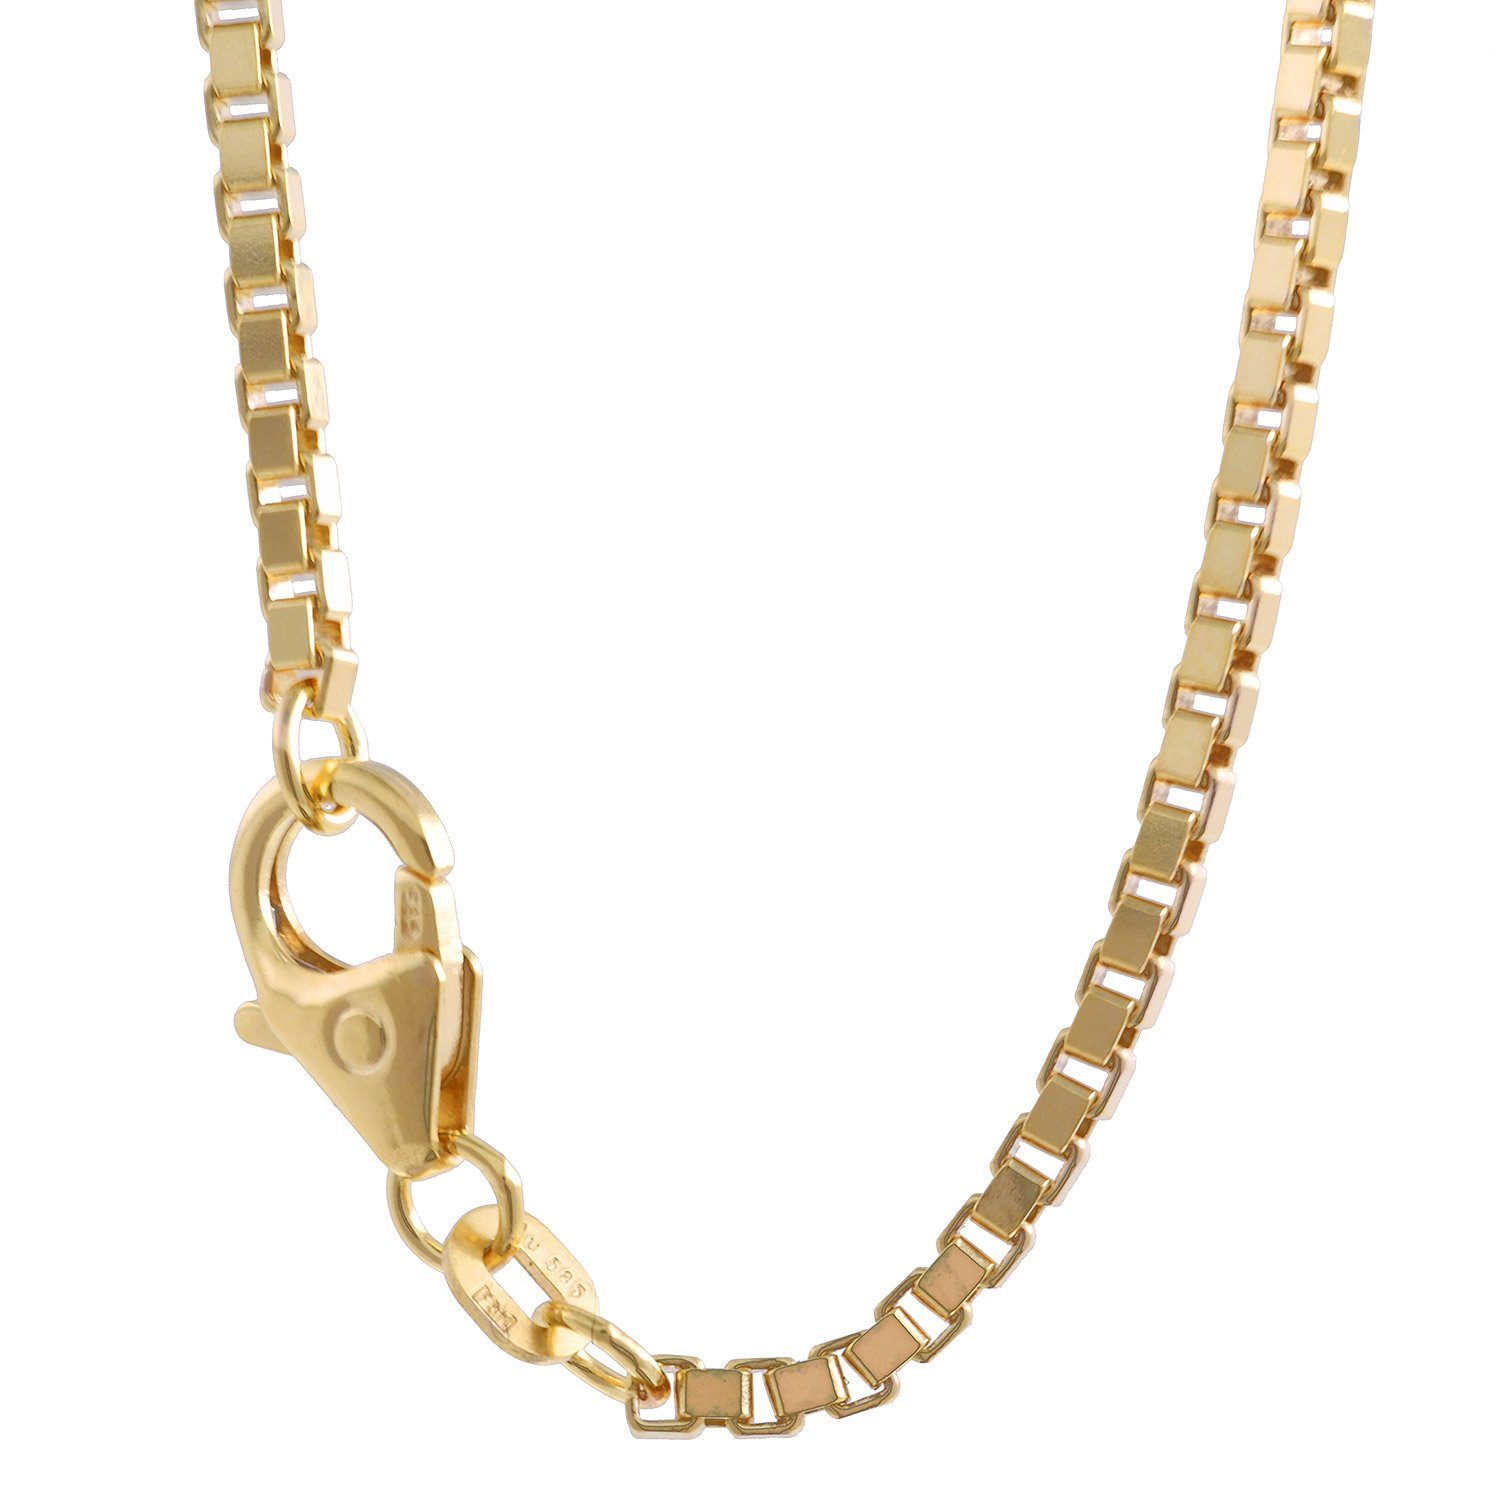 HOPLO Goldkette, Made in Germany